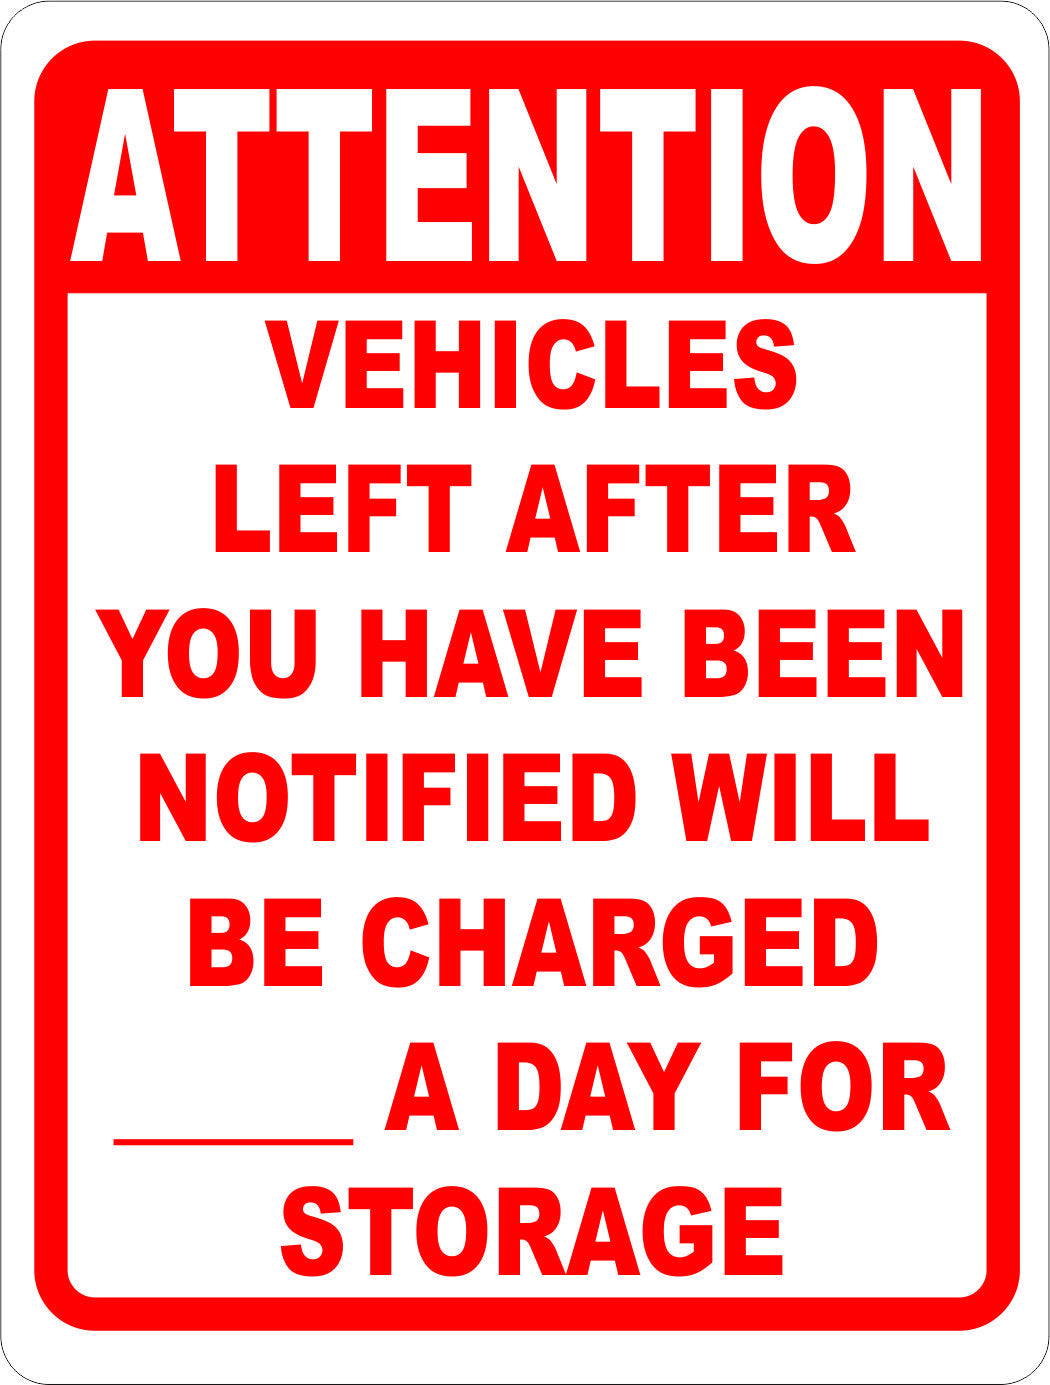 Attention Vehicles Left After You Have Been Notified of Completions will be Charged $ Per Day for Storage Sign - Signs & Decals by SalaGraphics